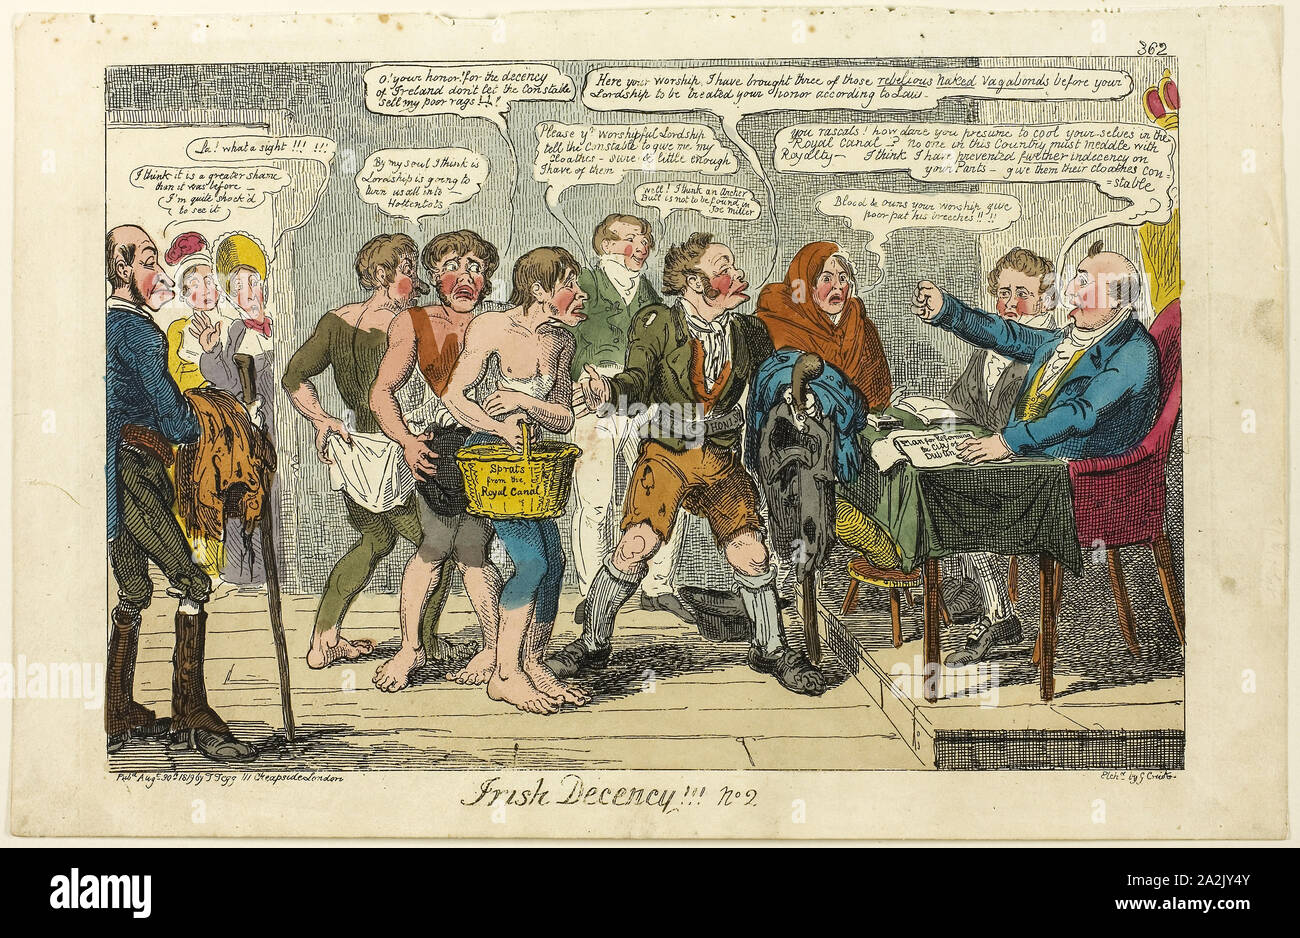 Irish Decency ! ! ! no. 2, published August 30, 1819, George Cruikshank (English, 1792-1878), published by Thomas Tegg (English 1776-1846), England, Hand-colored etching on wove paper, 219 × 331 mm (image), 255 × 393 mm (sheet, cut to plate mark Stock Photo